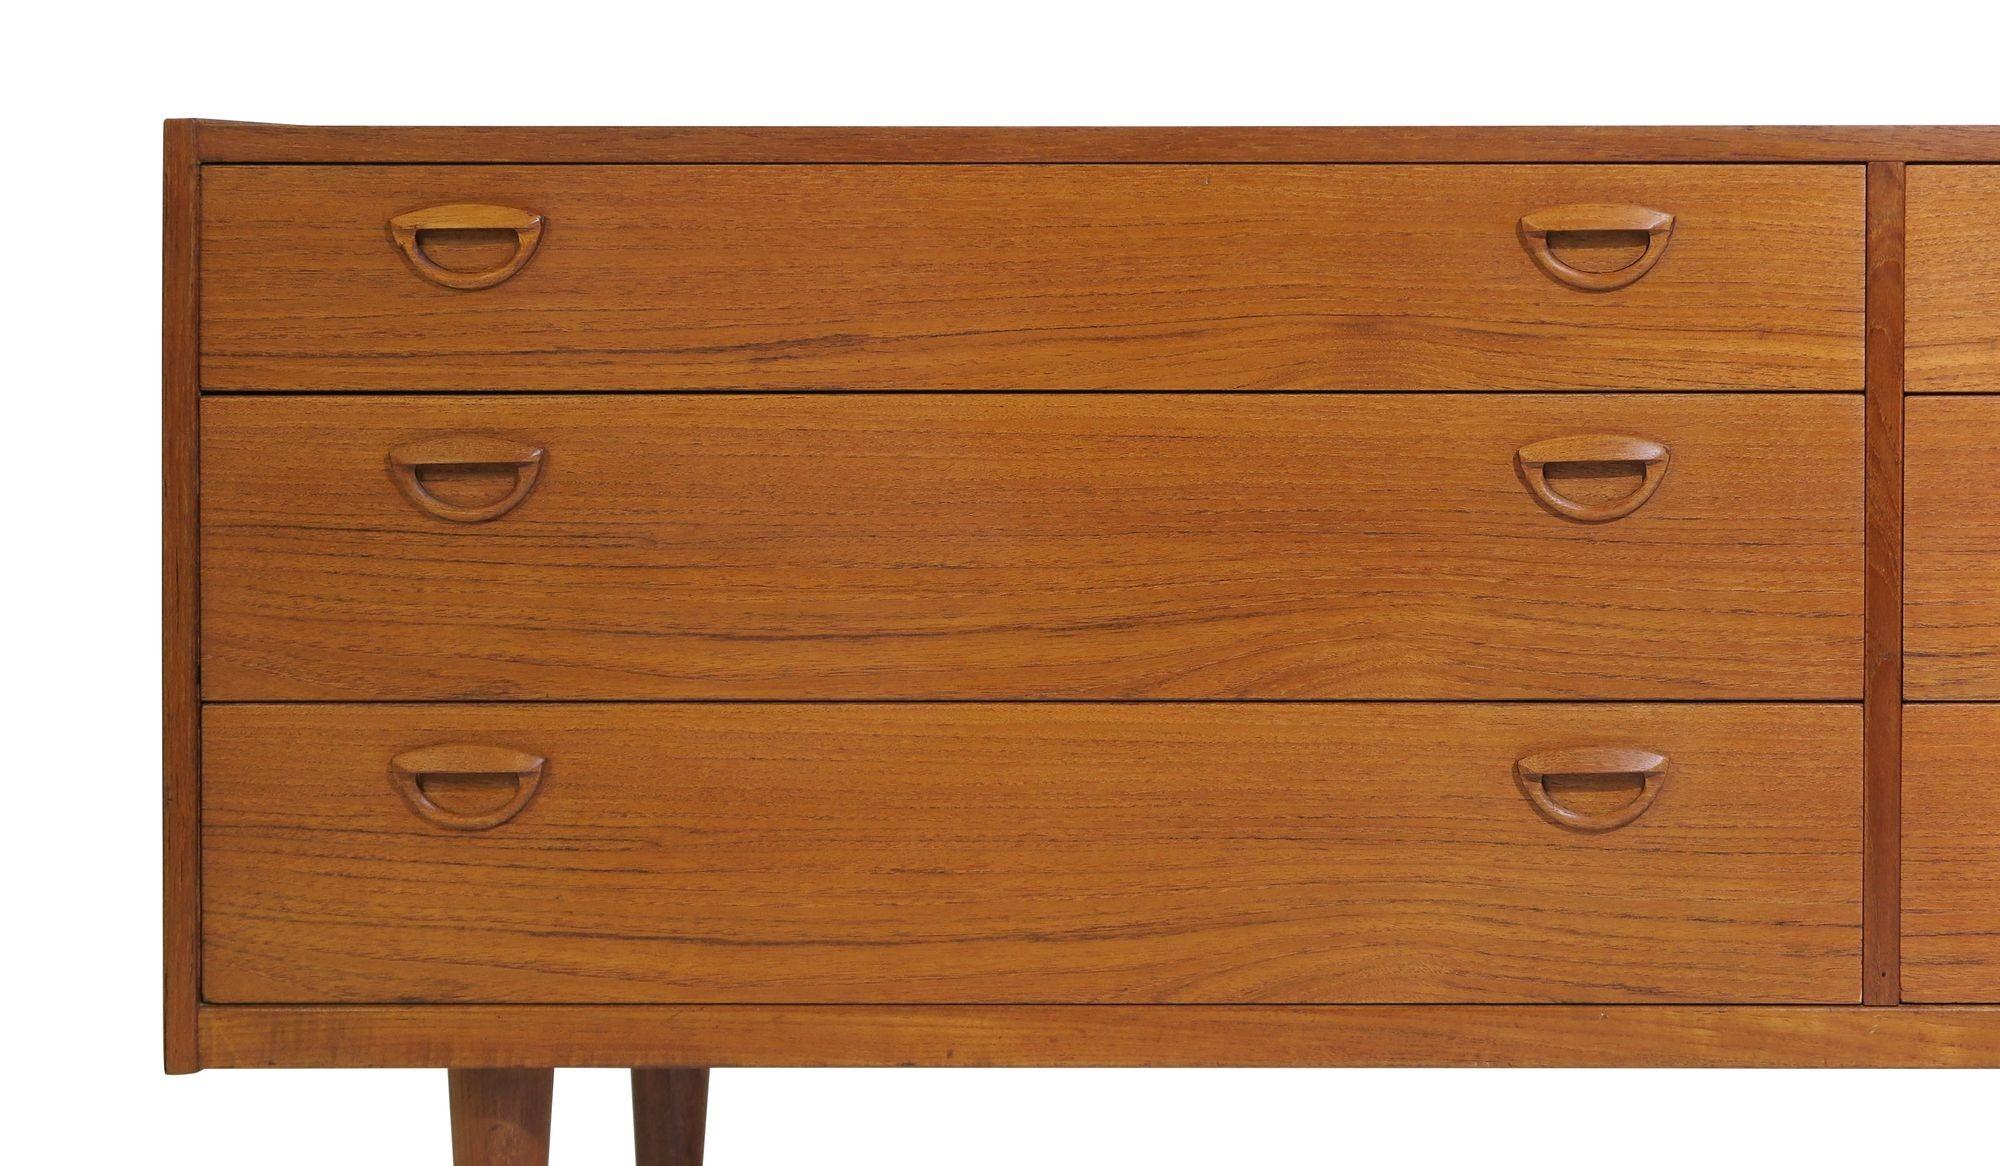 Midcentury Danish teak low dresser designed by Kai Kristiansen, 1955, Denmark. The dresser is crafted of teak with six book-matched drawers and carved pulls, raised on solid teak legs.
Kristiansen's designs are characterized by their simple and